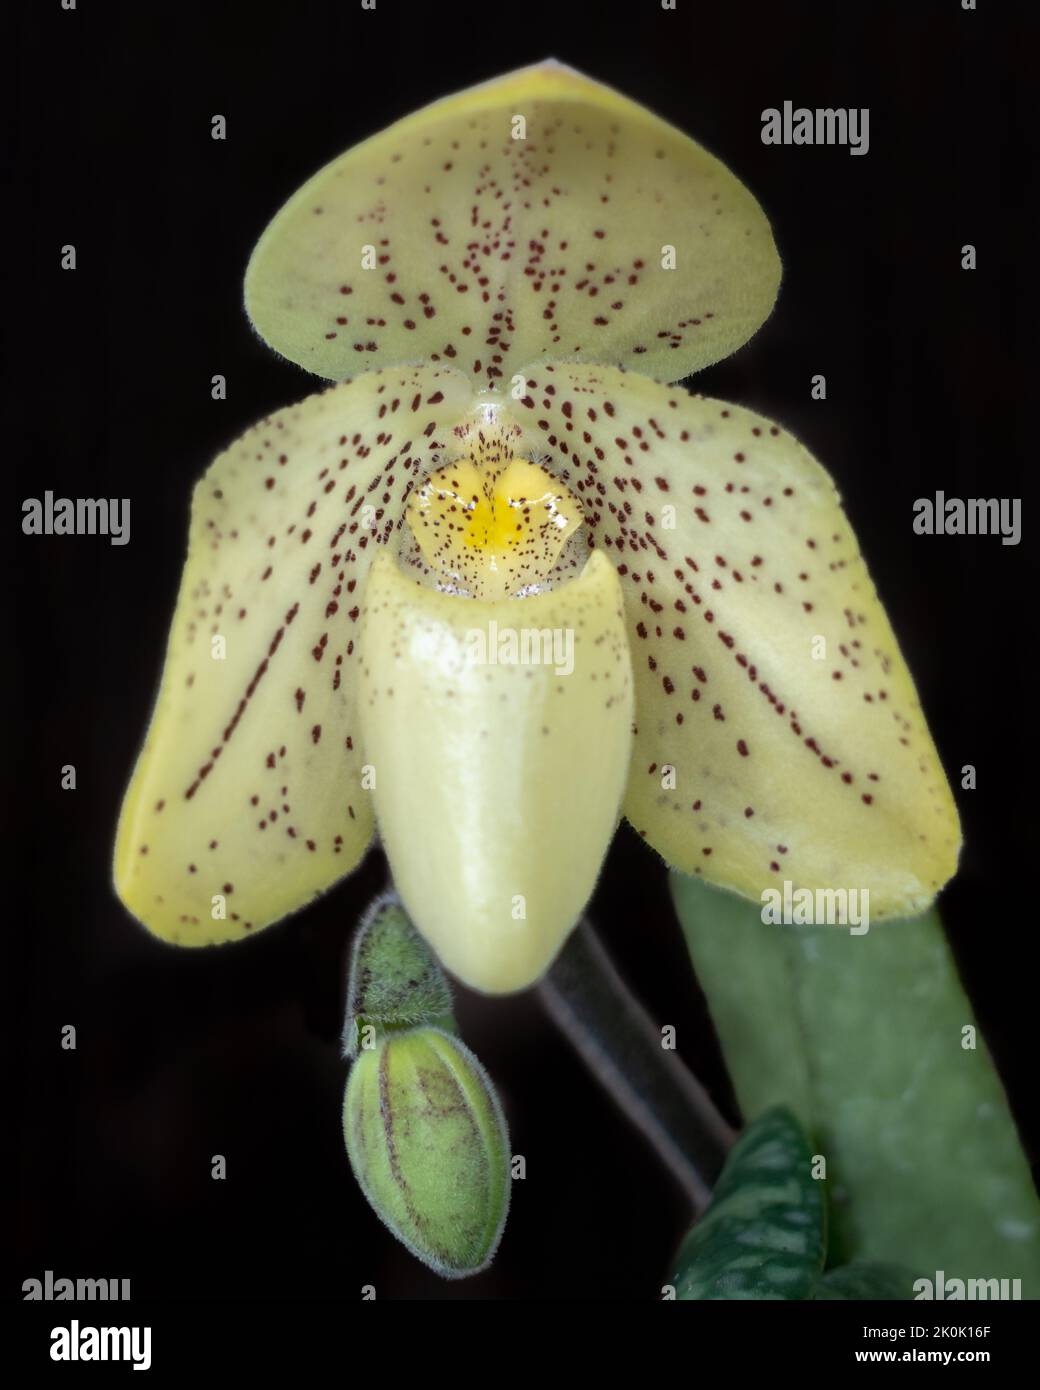 Closeup view of fresh yellow flower and bud of lady slipper orchid species paphiopedilum concolor isolated on black background Stock Photo